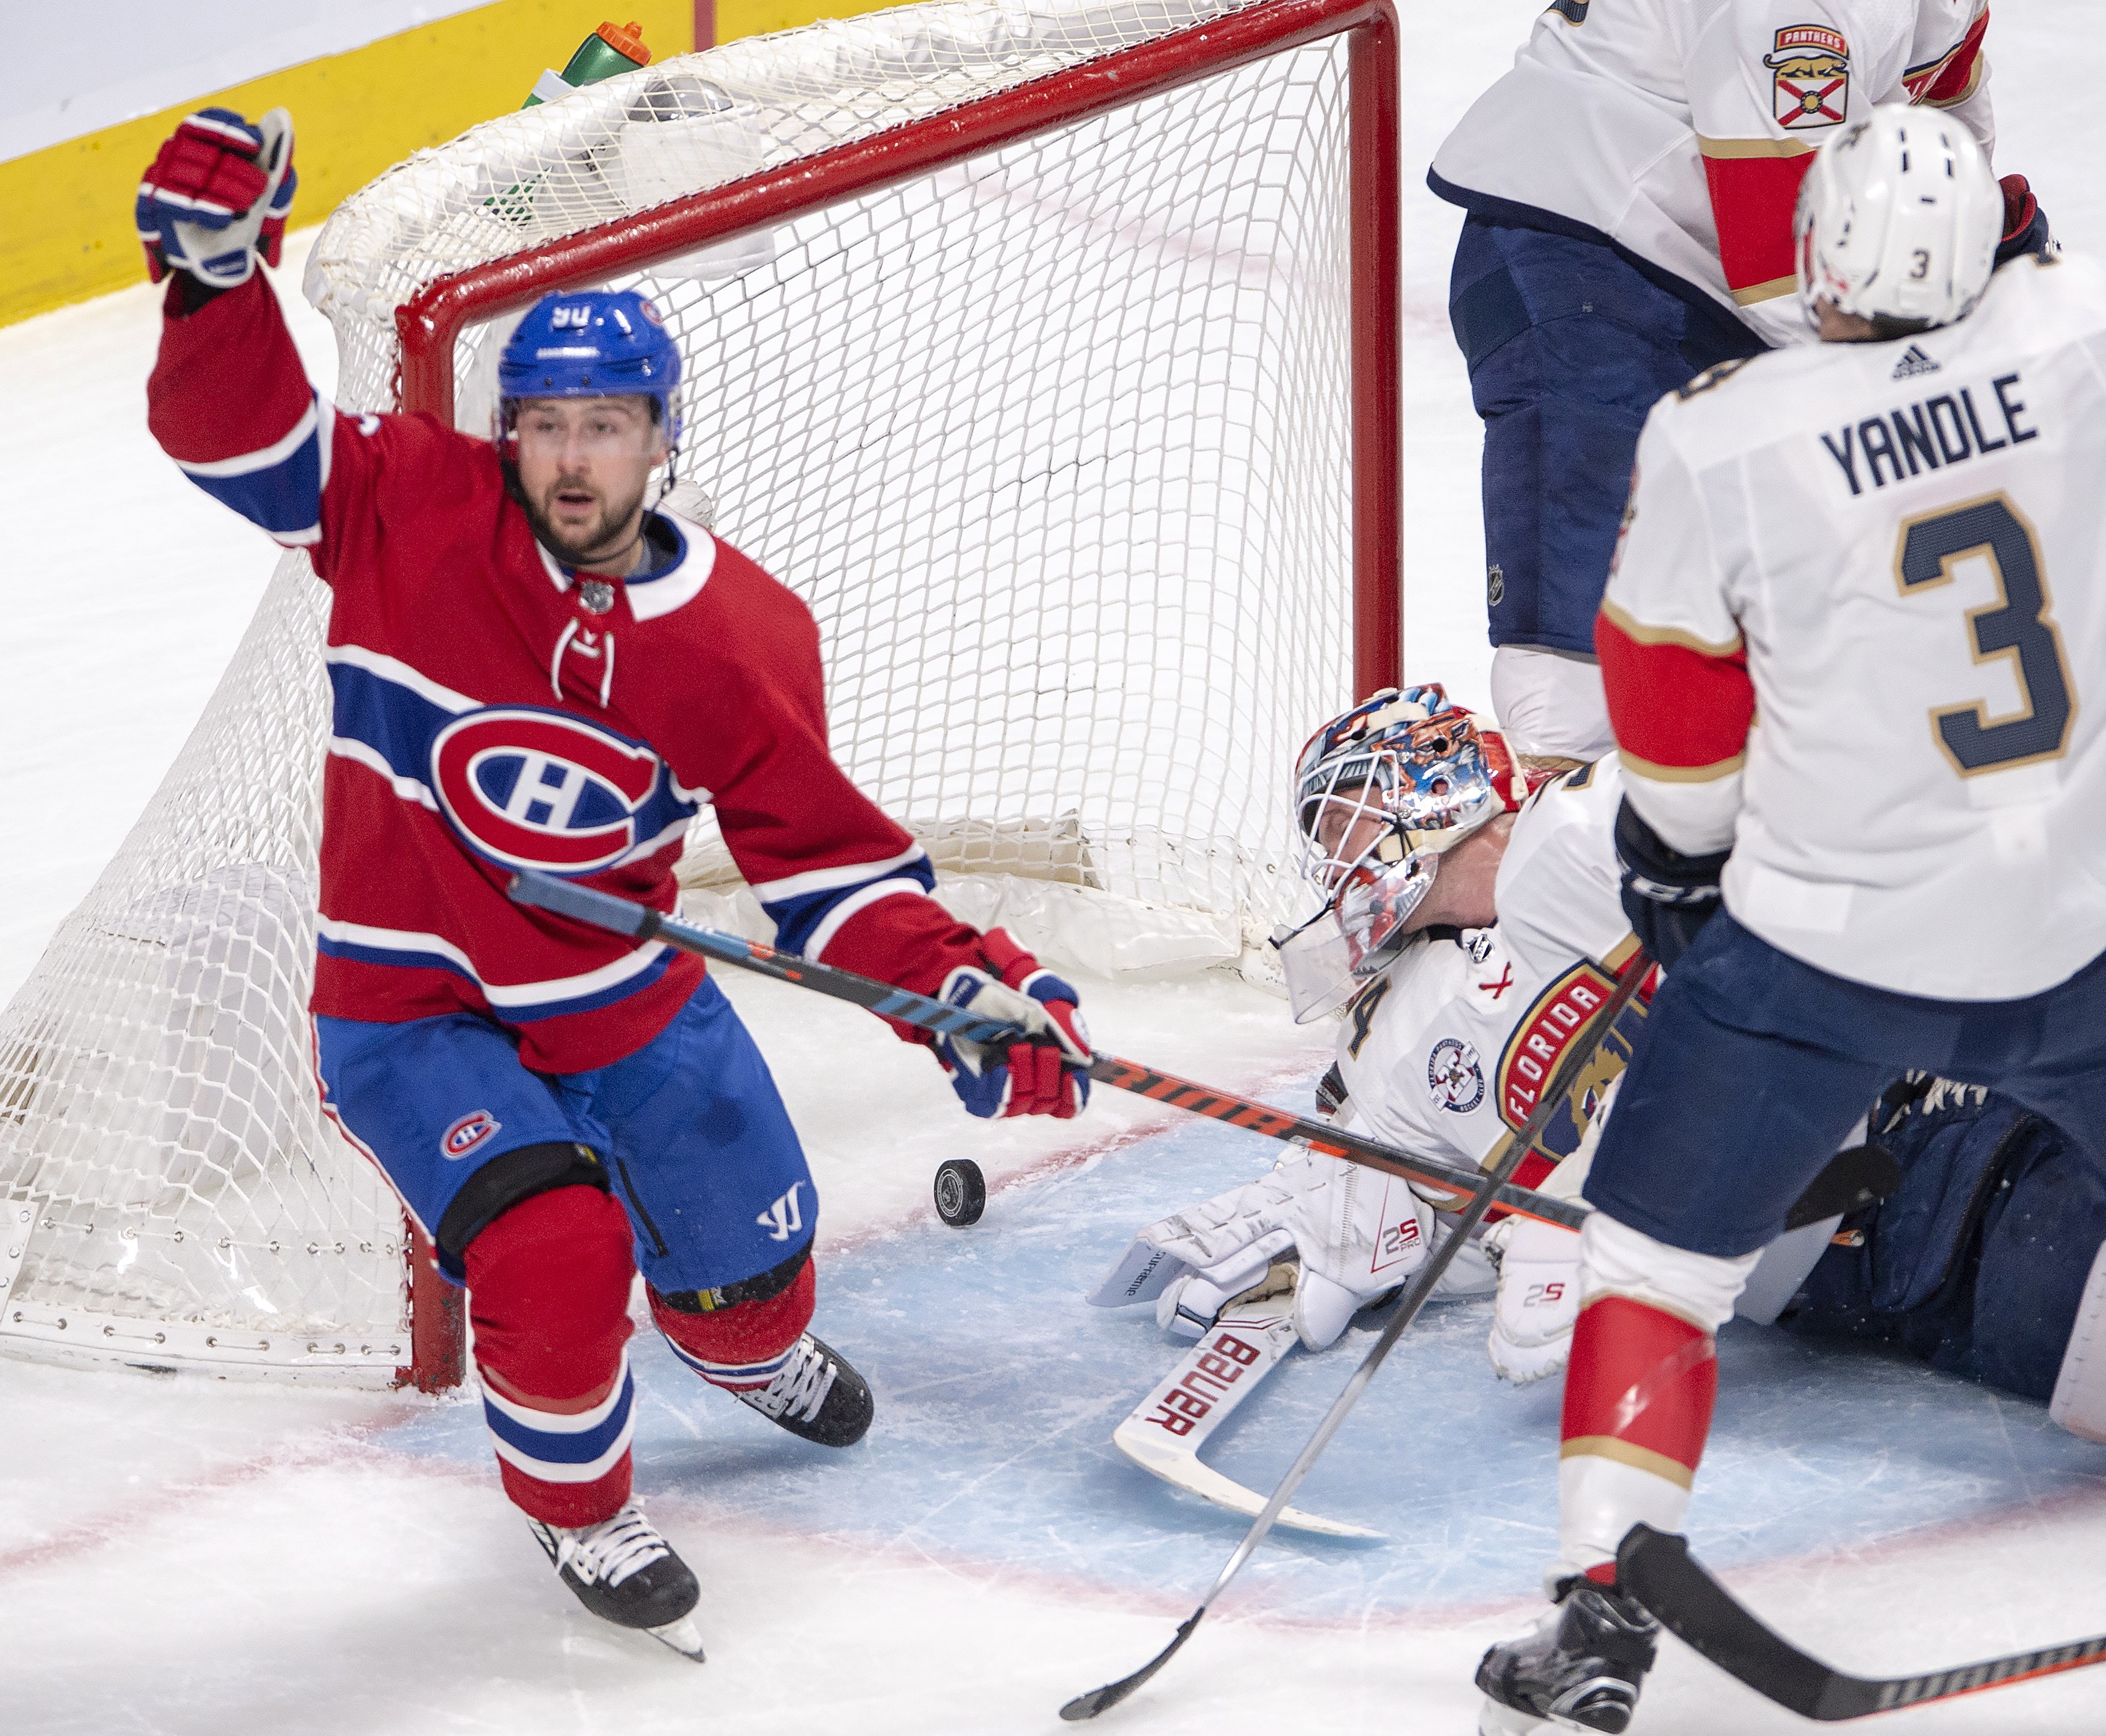 Call of the Wilde: Montreal Canadiens lose in shootout to Tampa